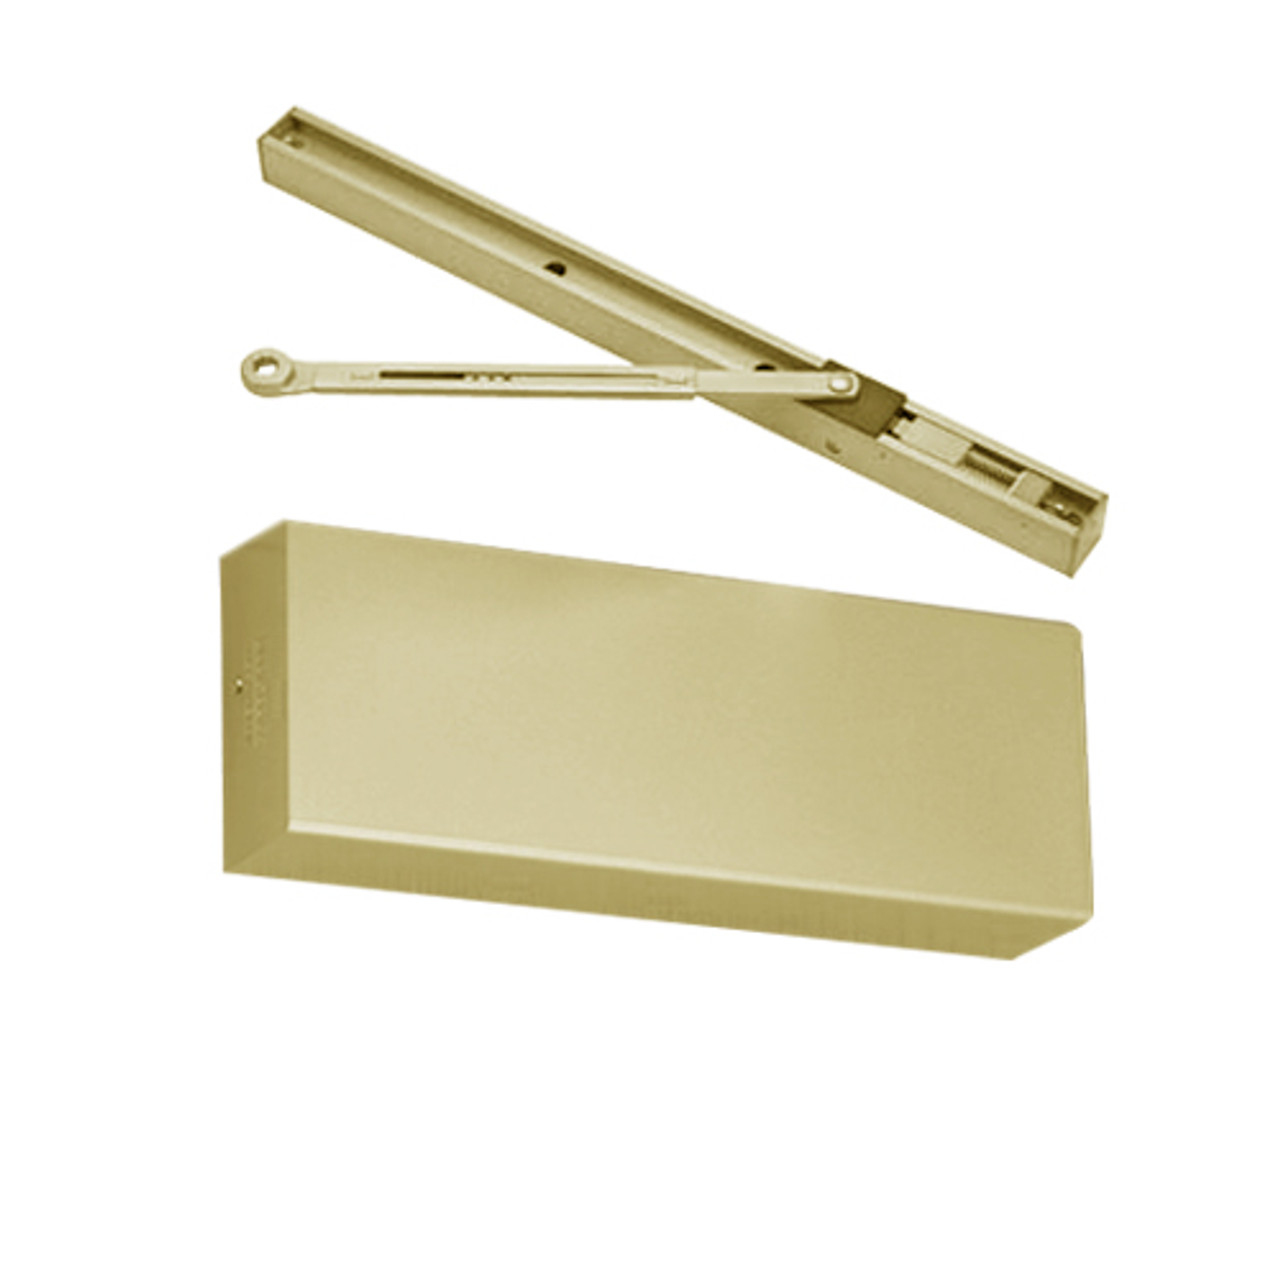 PS9500STM-696 Norton 9500 Series Non-Hold Open Cast Iron Door Closer with Push Side Slide Track in Gold Finish